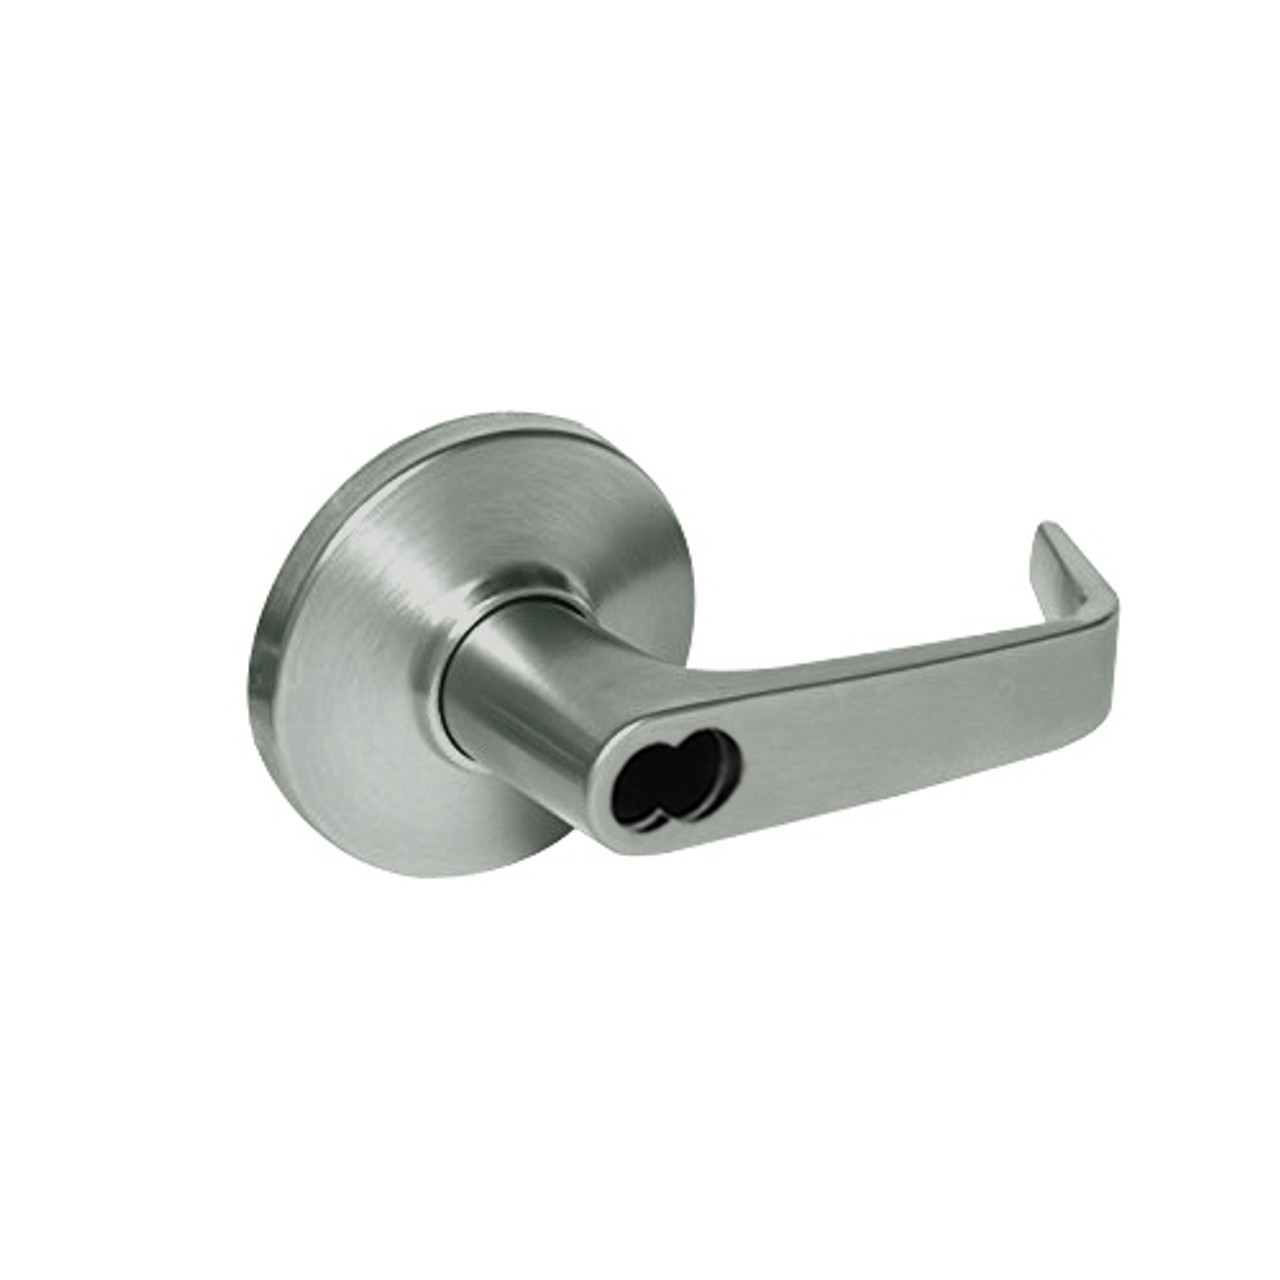 9K37DR15DS3619LM Best 9K Series Special Function Cylindrical Lever Locks with Contour Angle with Return Lever Design Accept 7 Pin Best Core in Satin Nickel